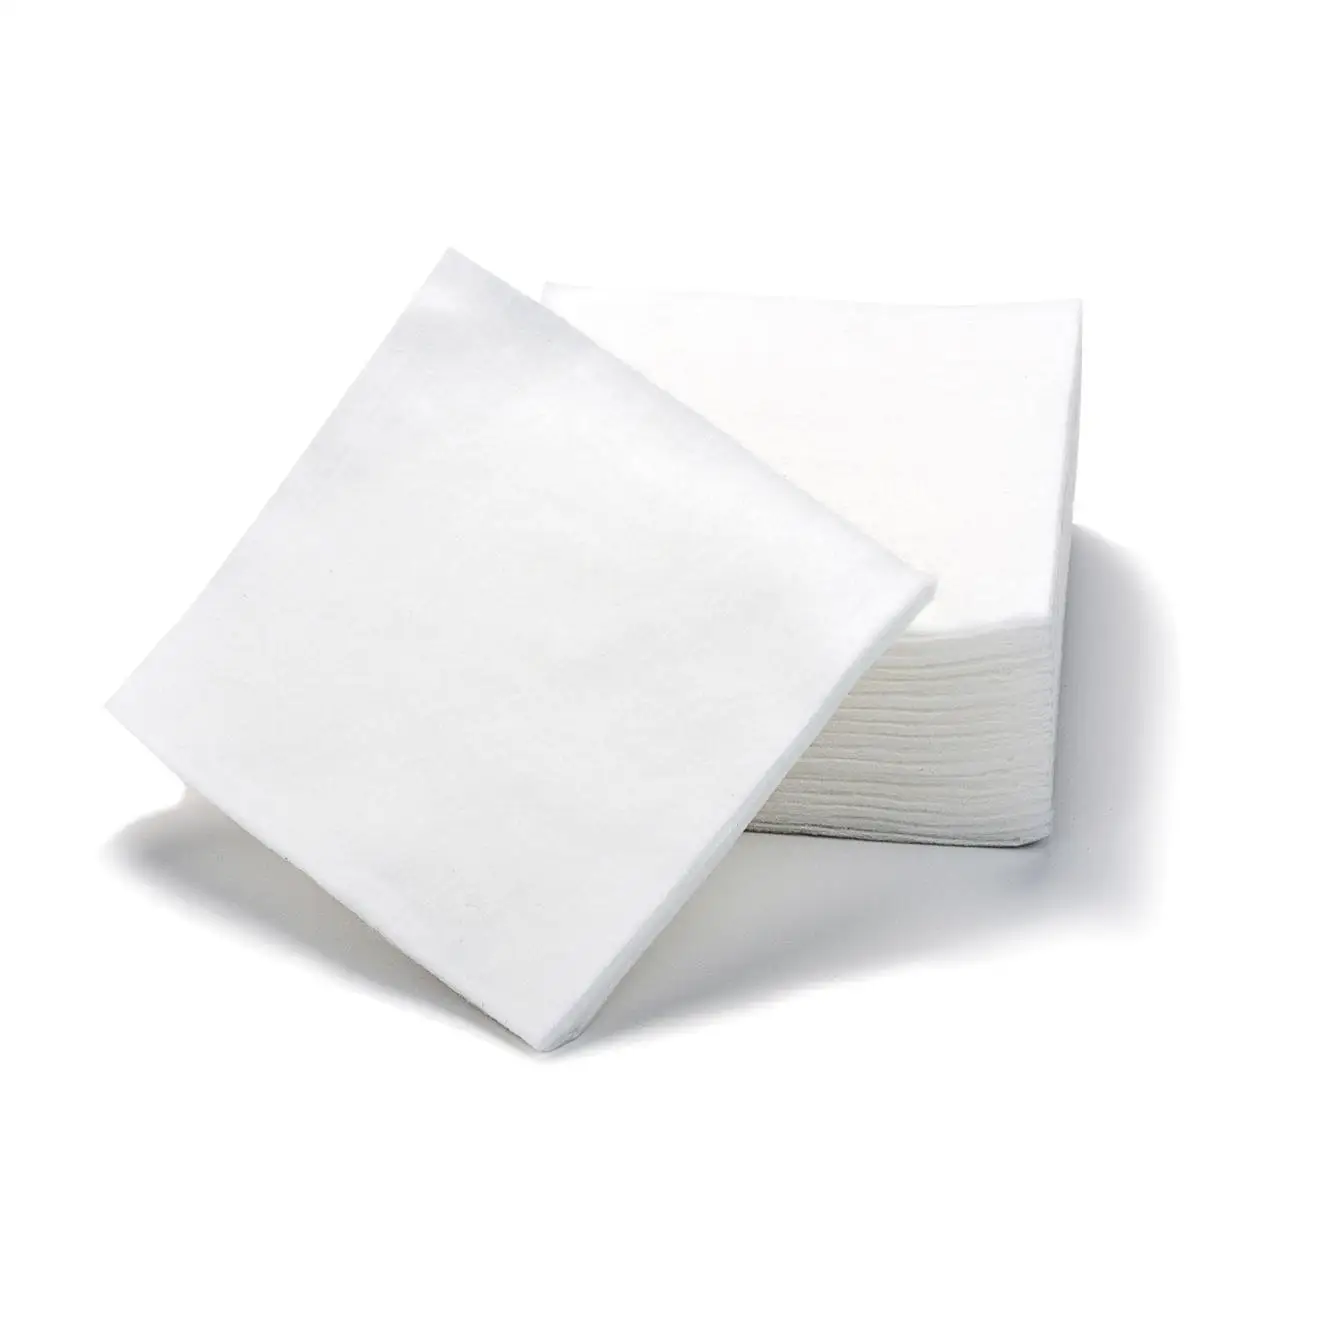 Pure Hypoallergenic Cotton Natural Ingredients Friendly Beauty Tools Disposable Square 4*4cm Cotton Pads